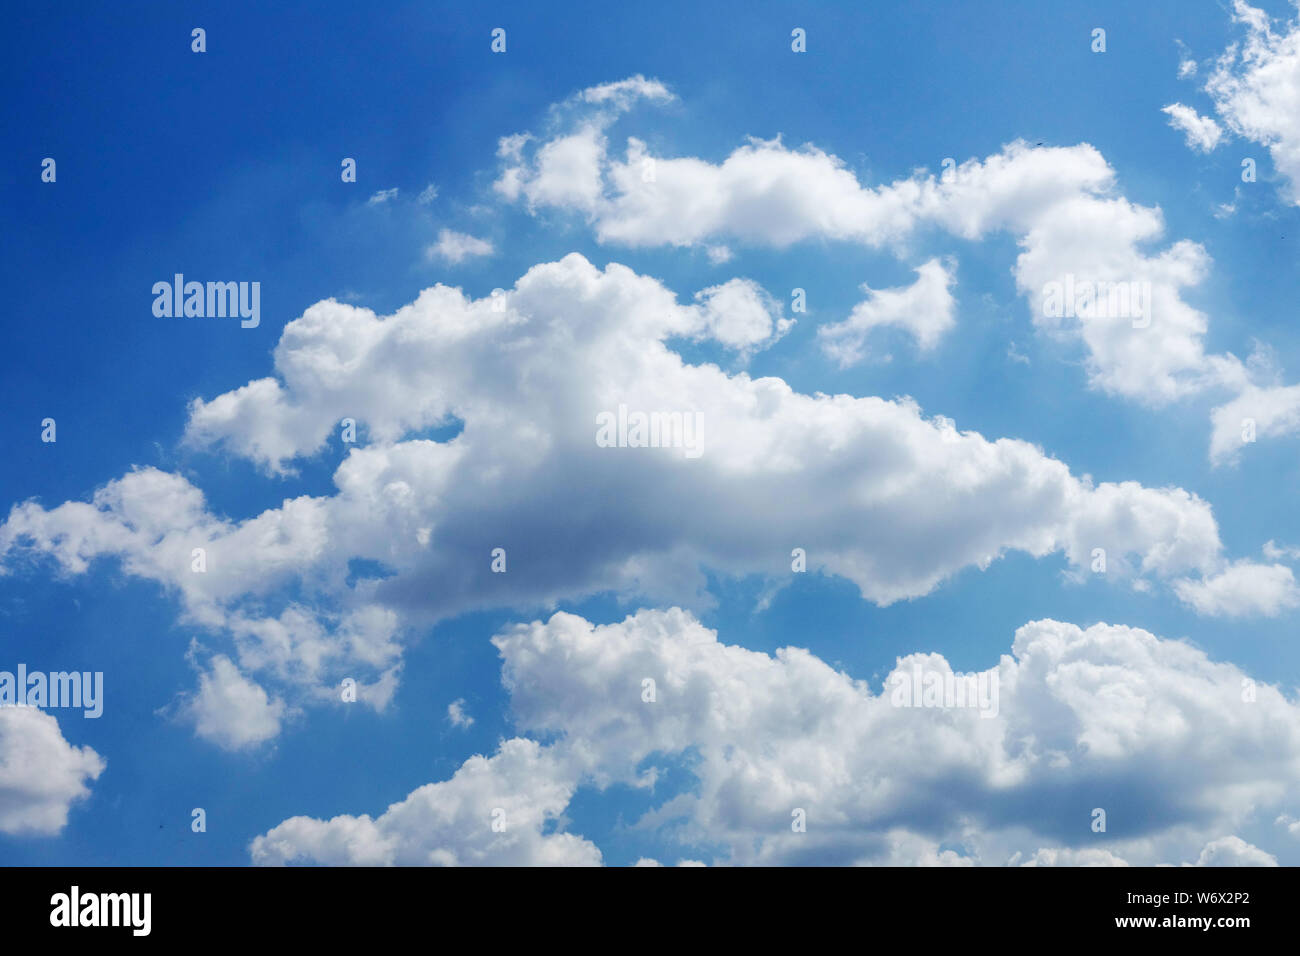 Fluffy white clouds float across the blue summer sky Stock Photo